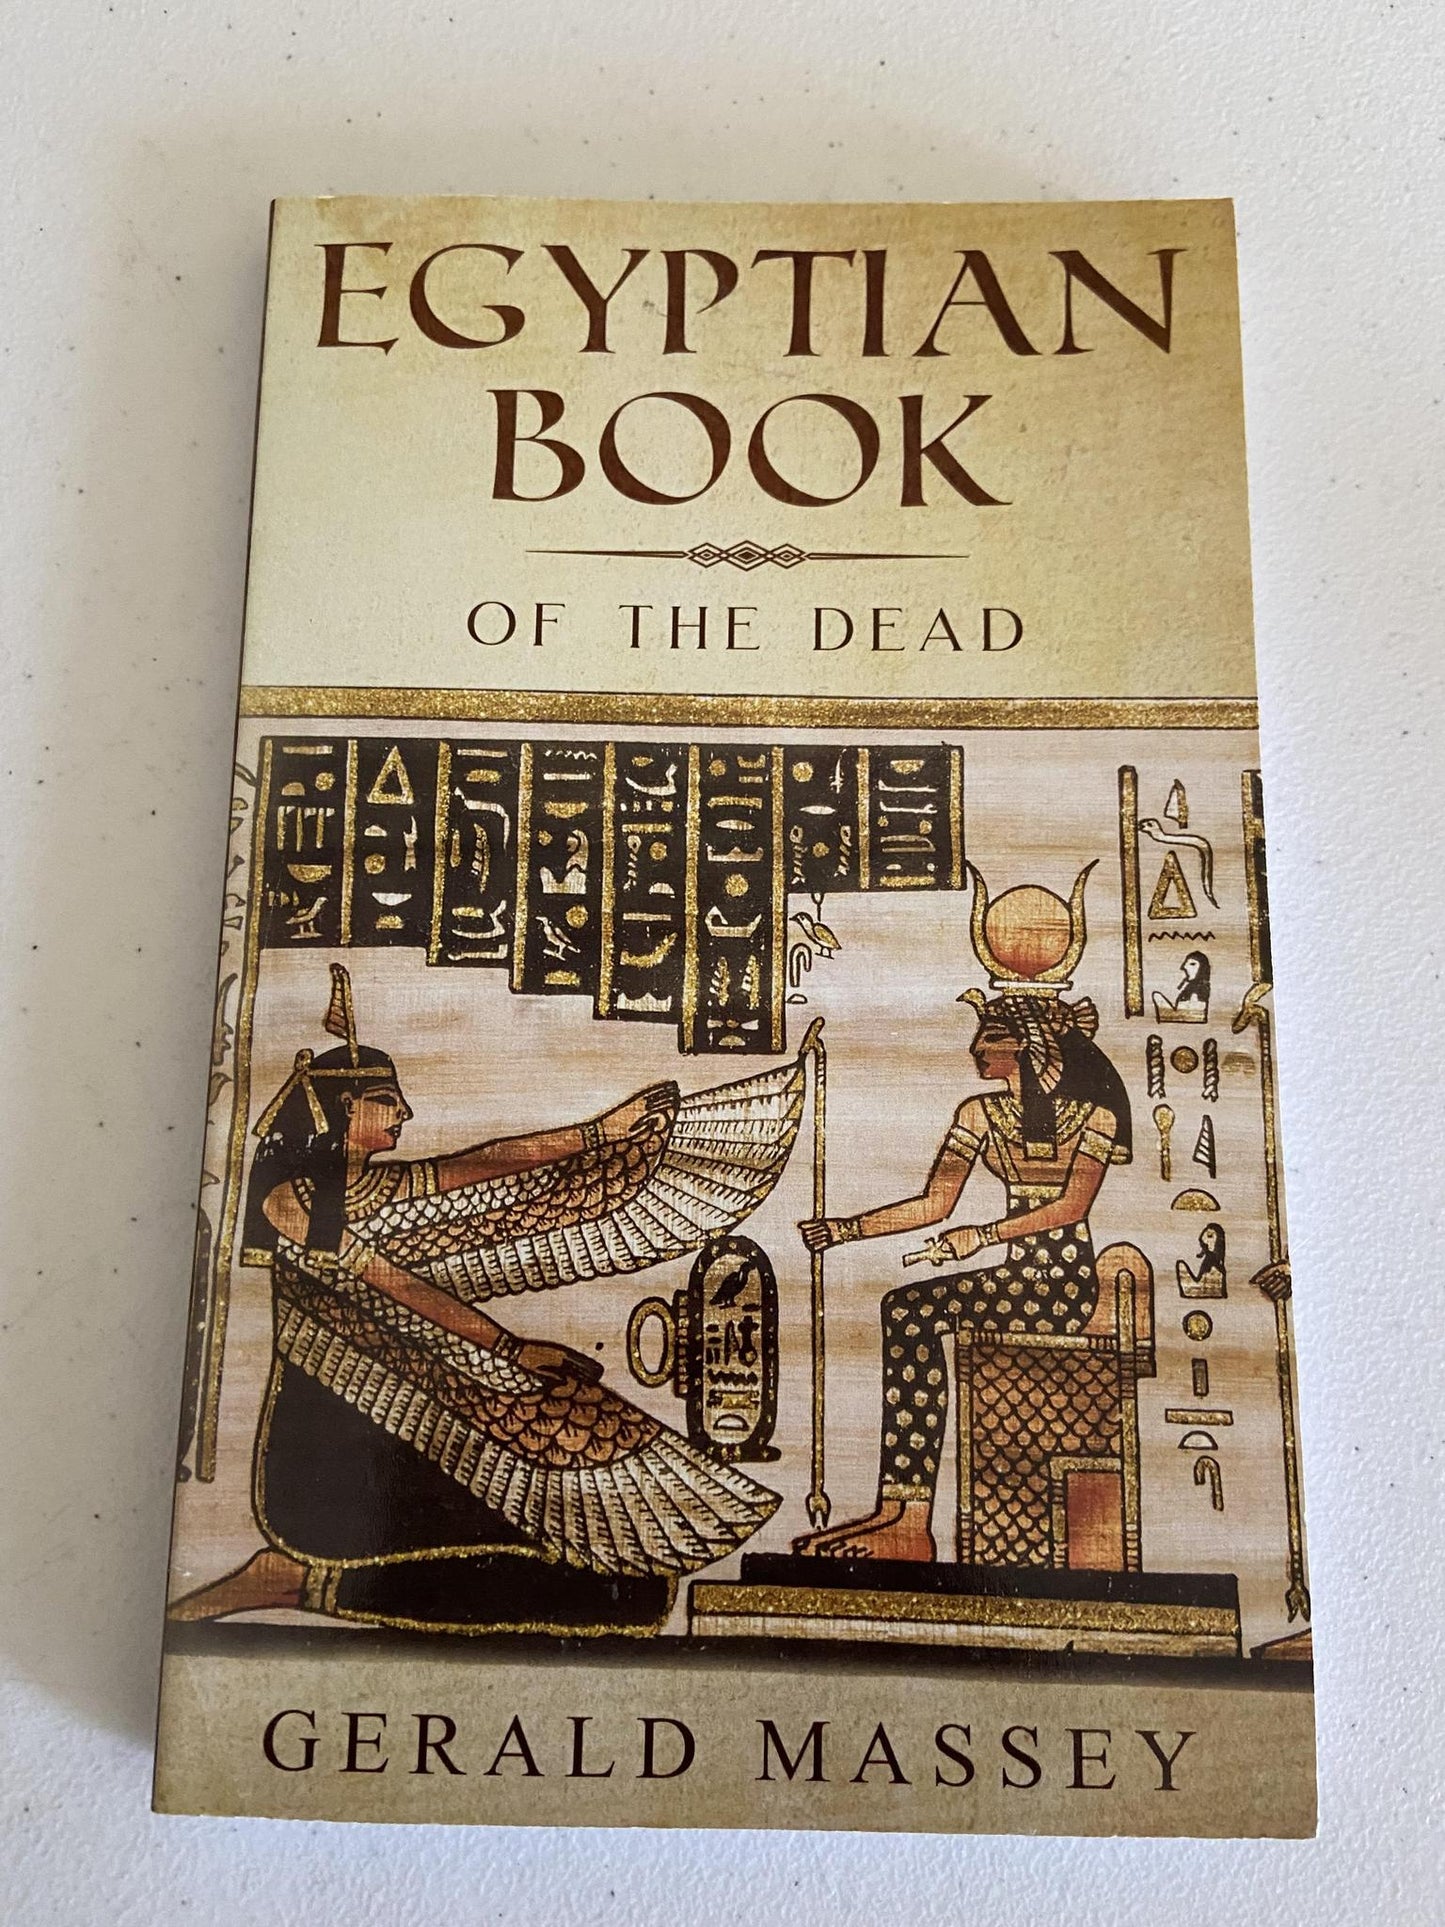 "Egyptian Book of the Dead" by Gerald Massey